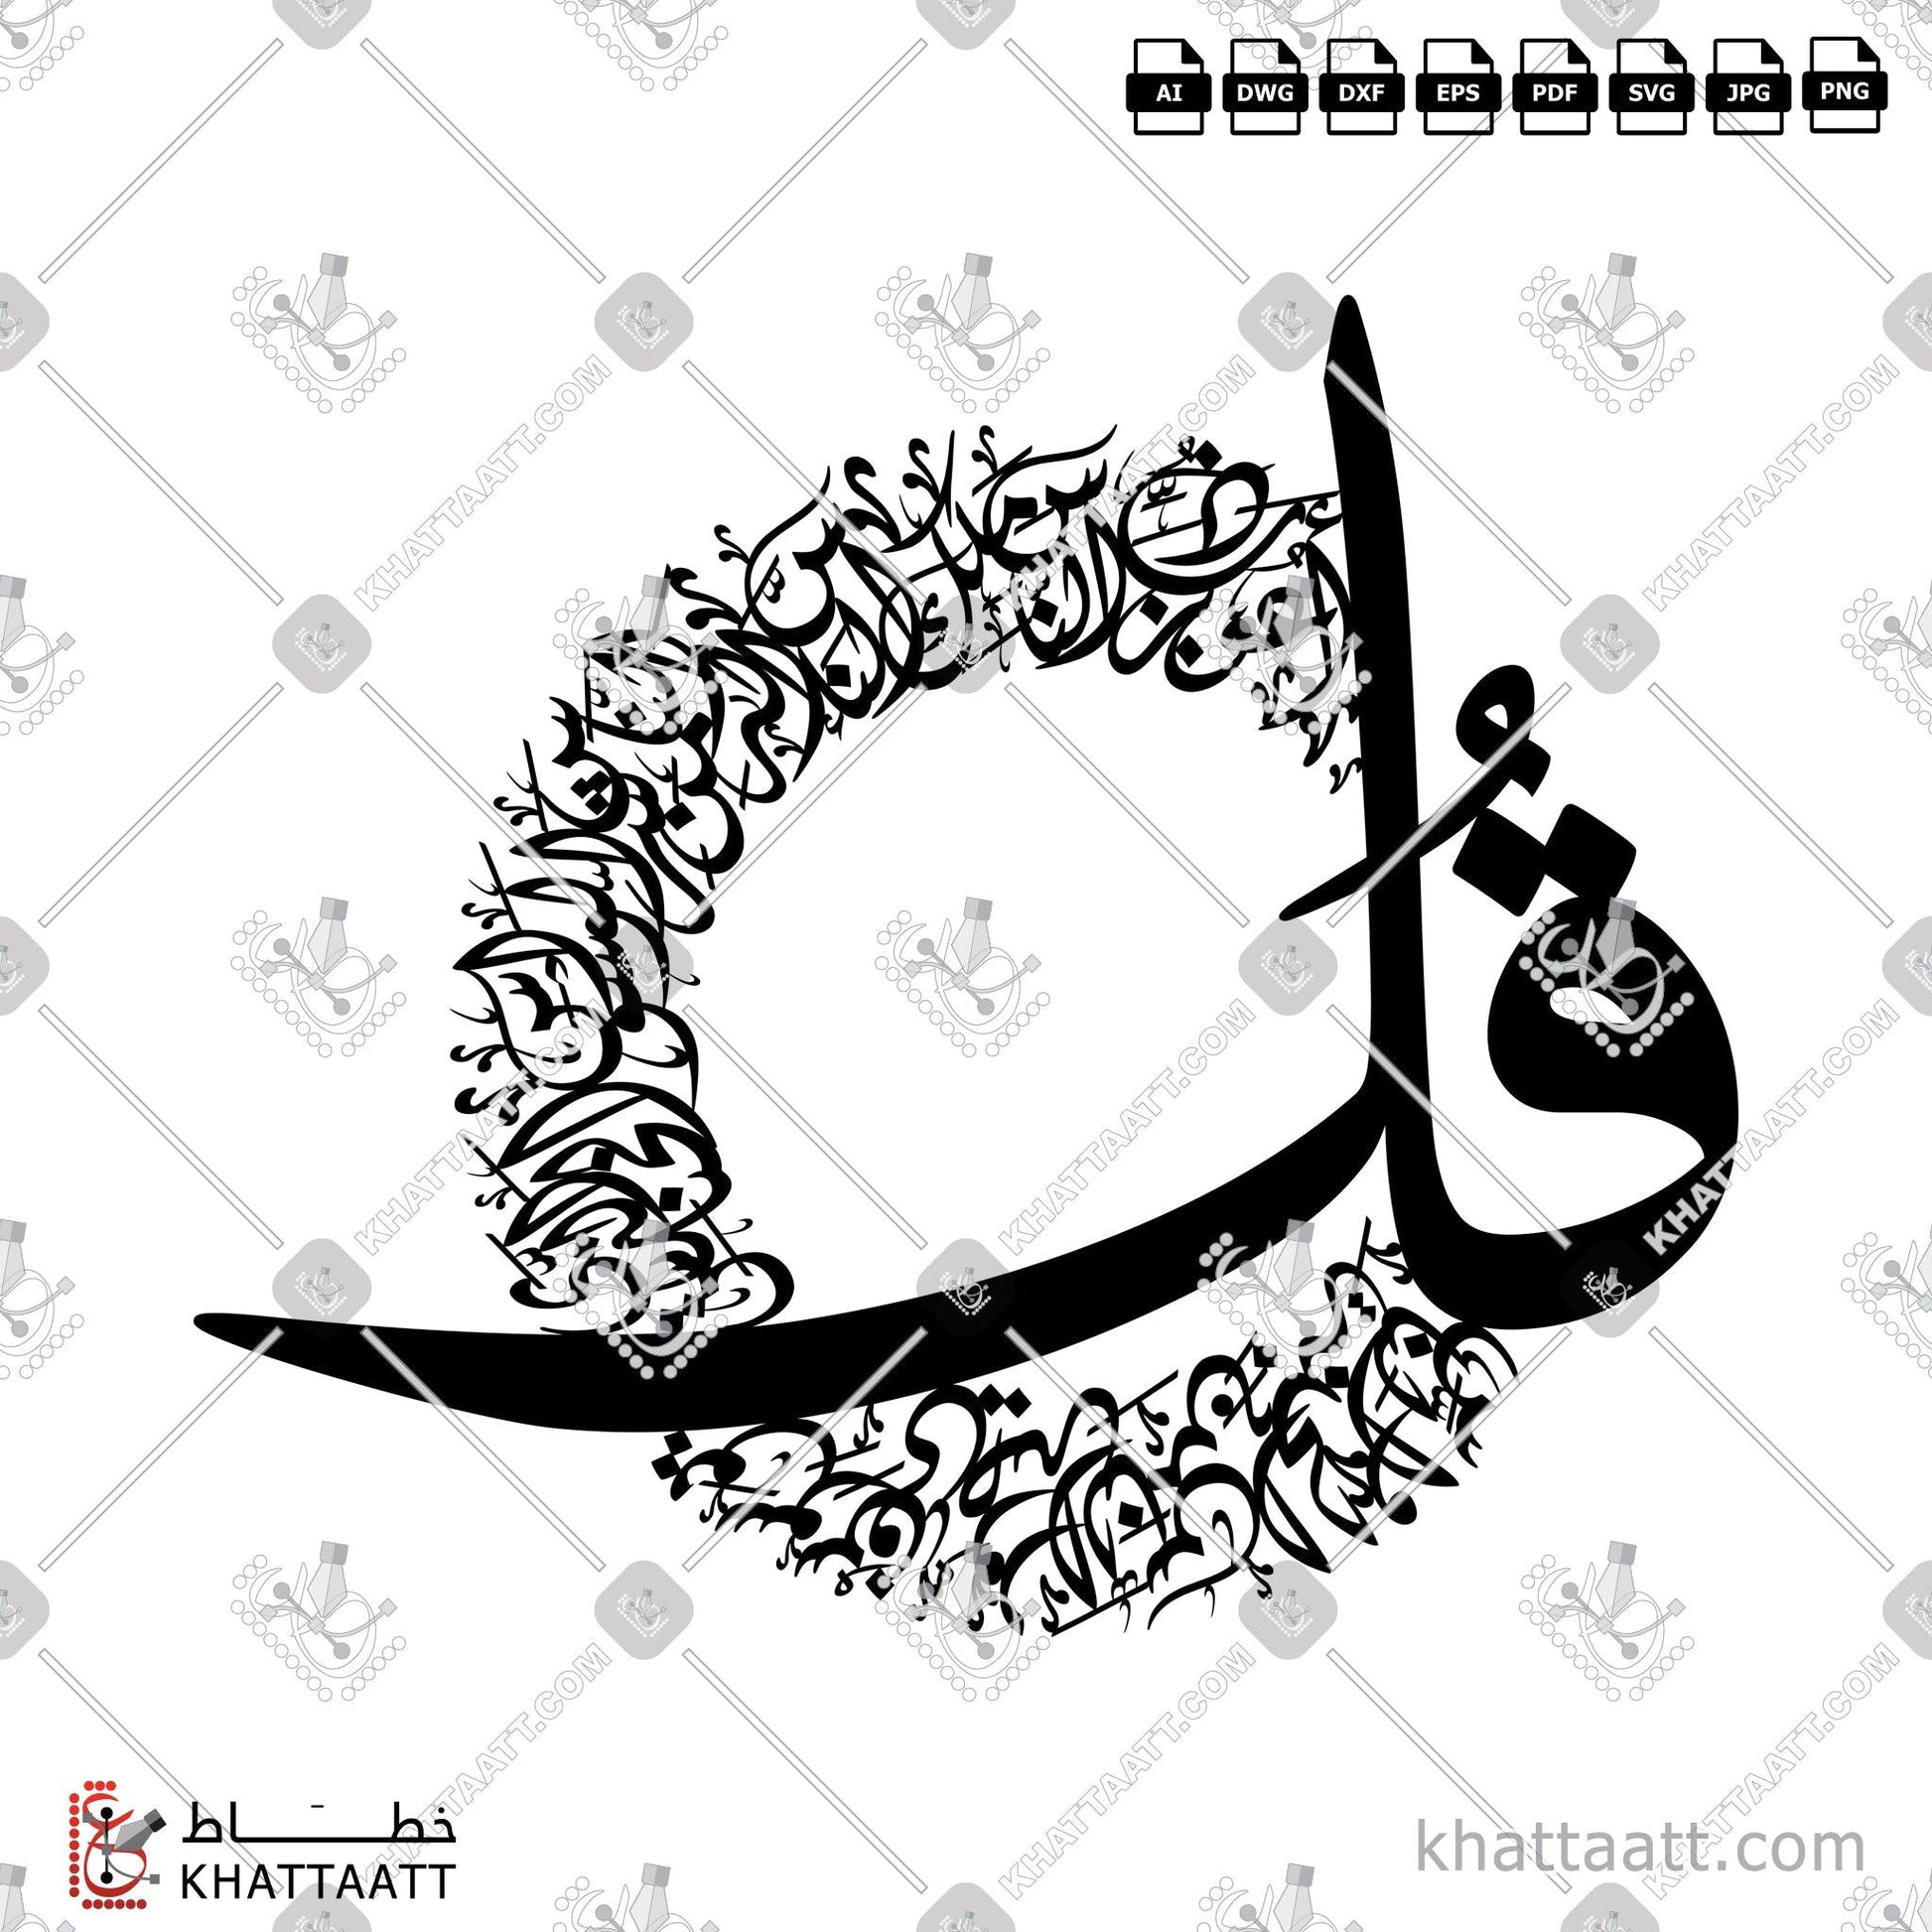 Download Arabic Calligraphy of Surat An-Naas - سورة الناس in Diwani - الخط الديواني in vector and .png